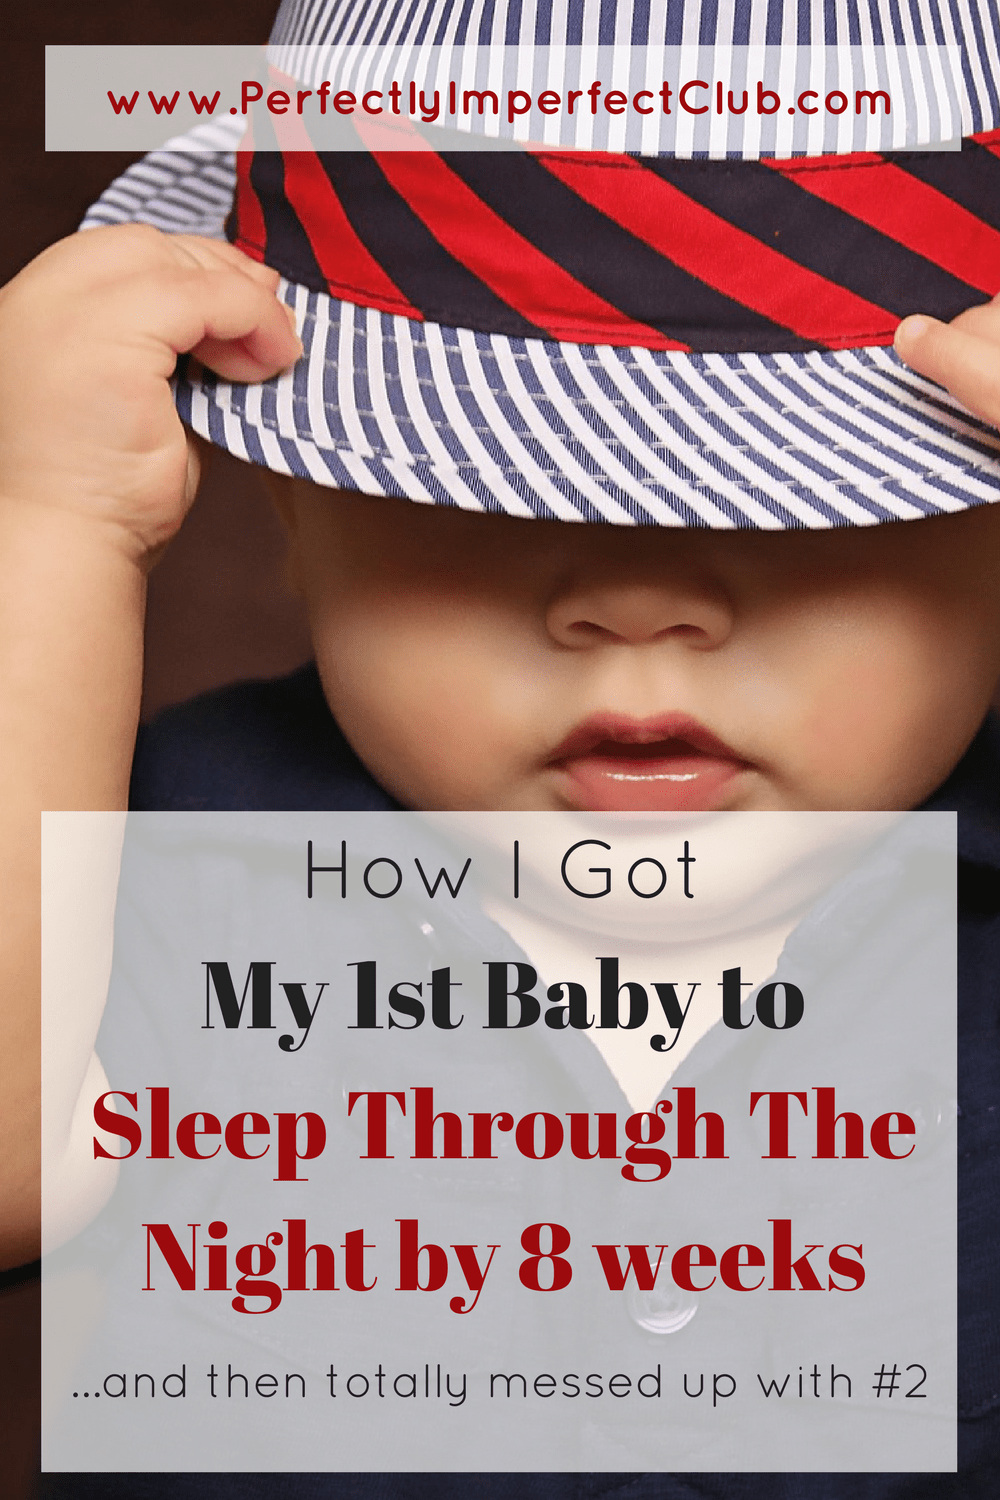 I got my first baby to sleep through the night by 8 weeks, but mothered totally differently for #2 and paid the price.